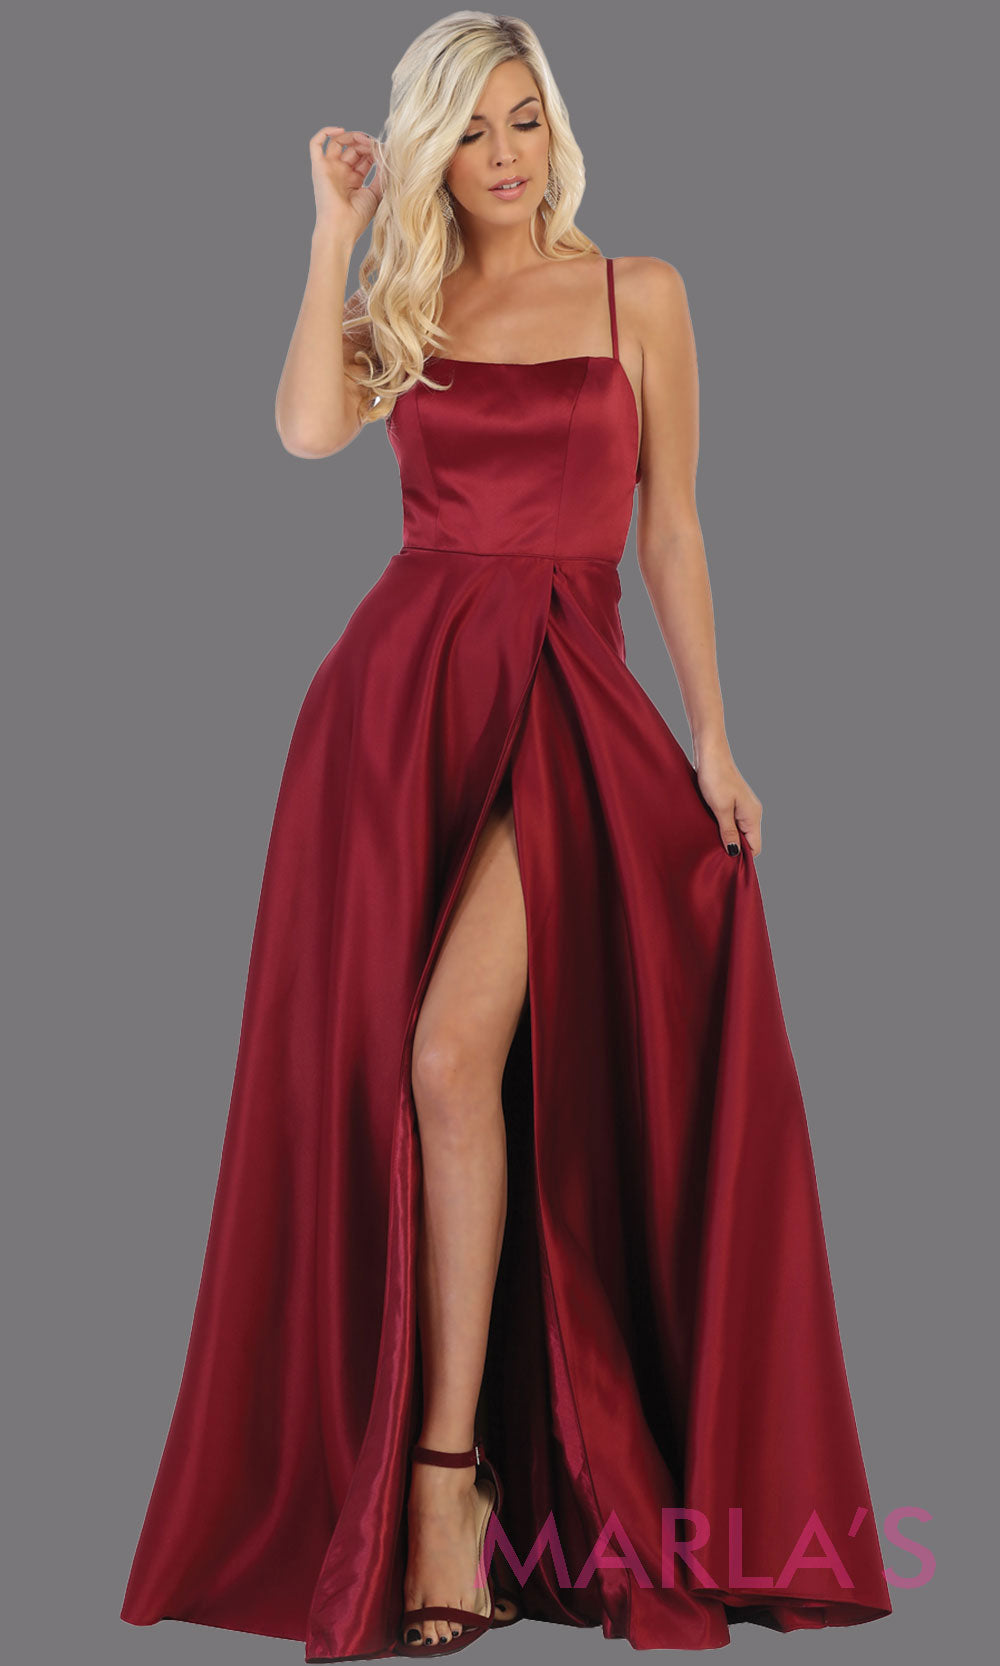 Long burgundy satin corset back dress with high slit from MayQueen RQ7711. This dark red prom evening gown is perfect for wedding guest dress, formal party dress, plus size dresses, engagement party, e shoot, engagement shoot, gala